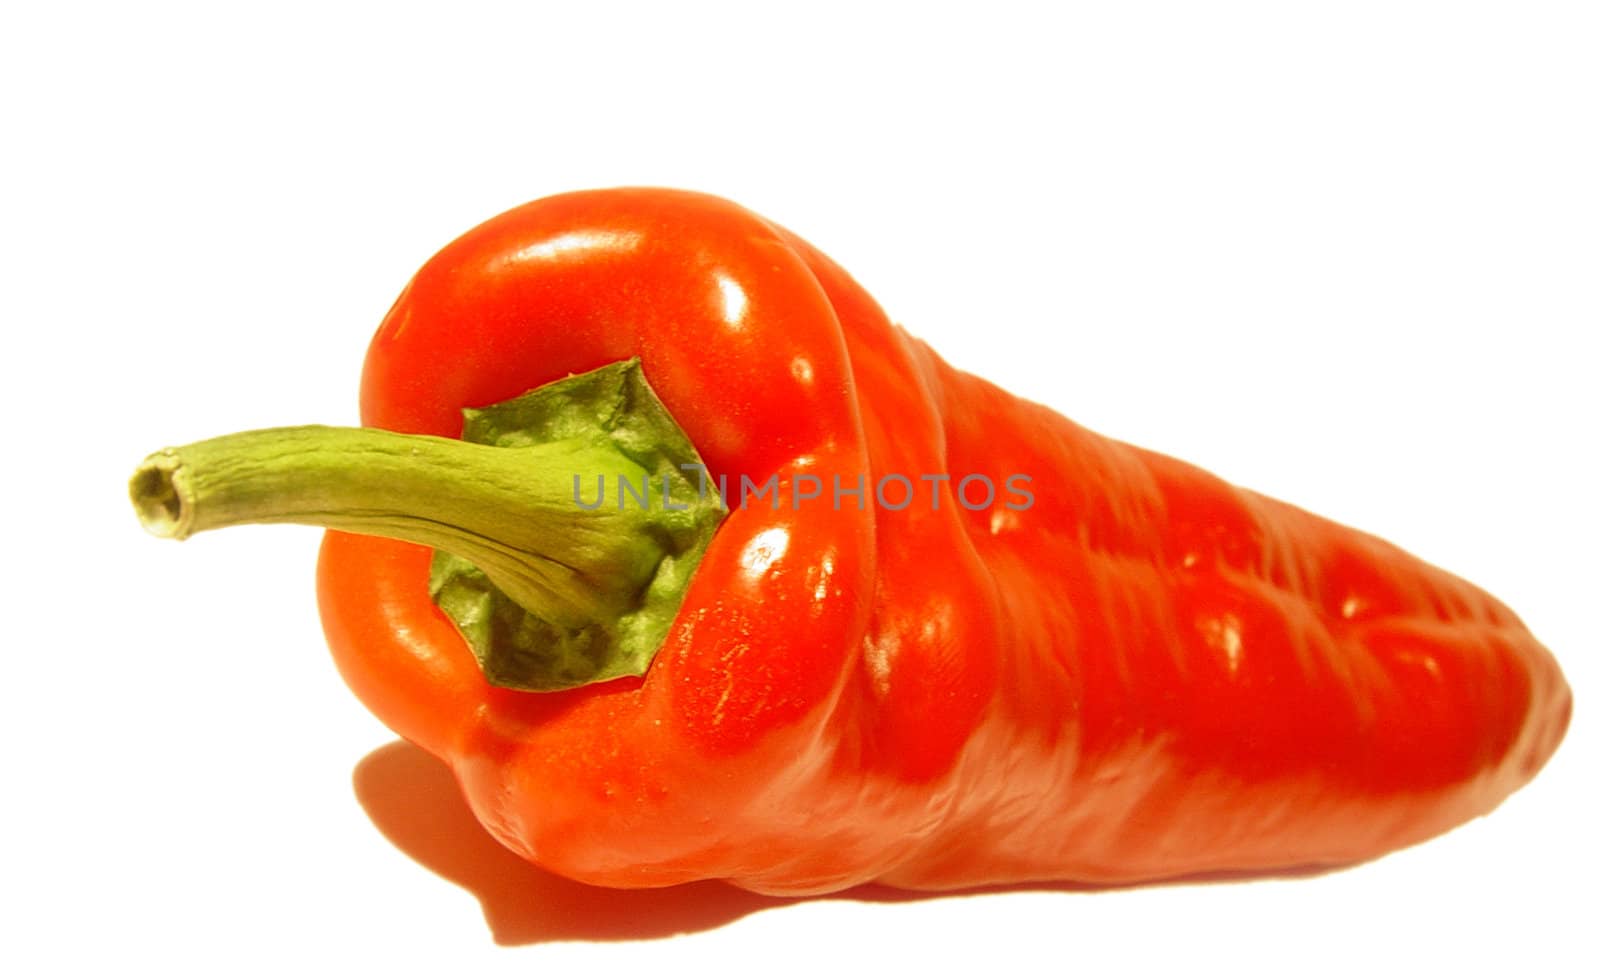 red pepper in white background